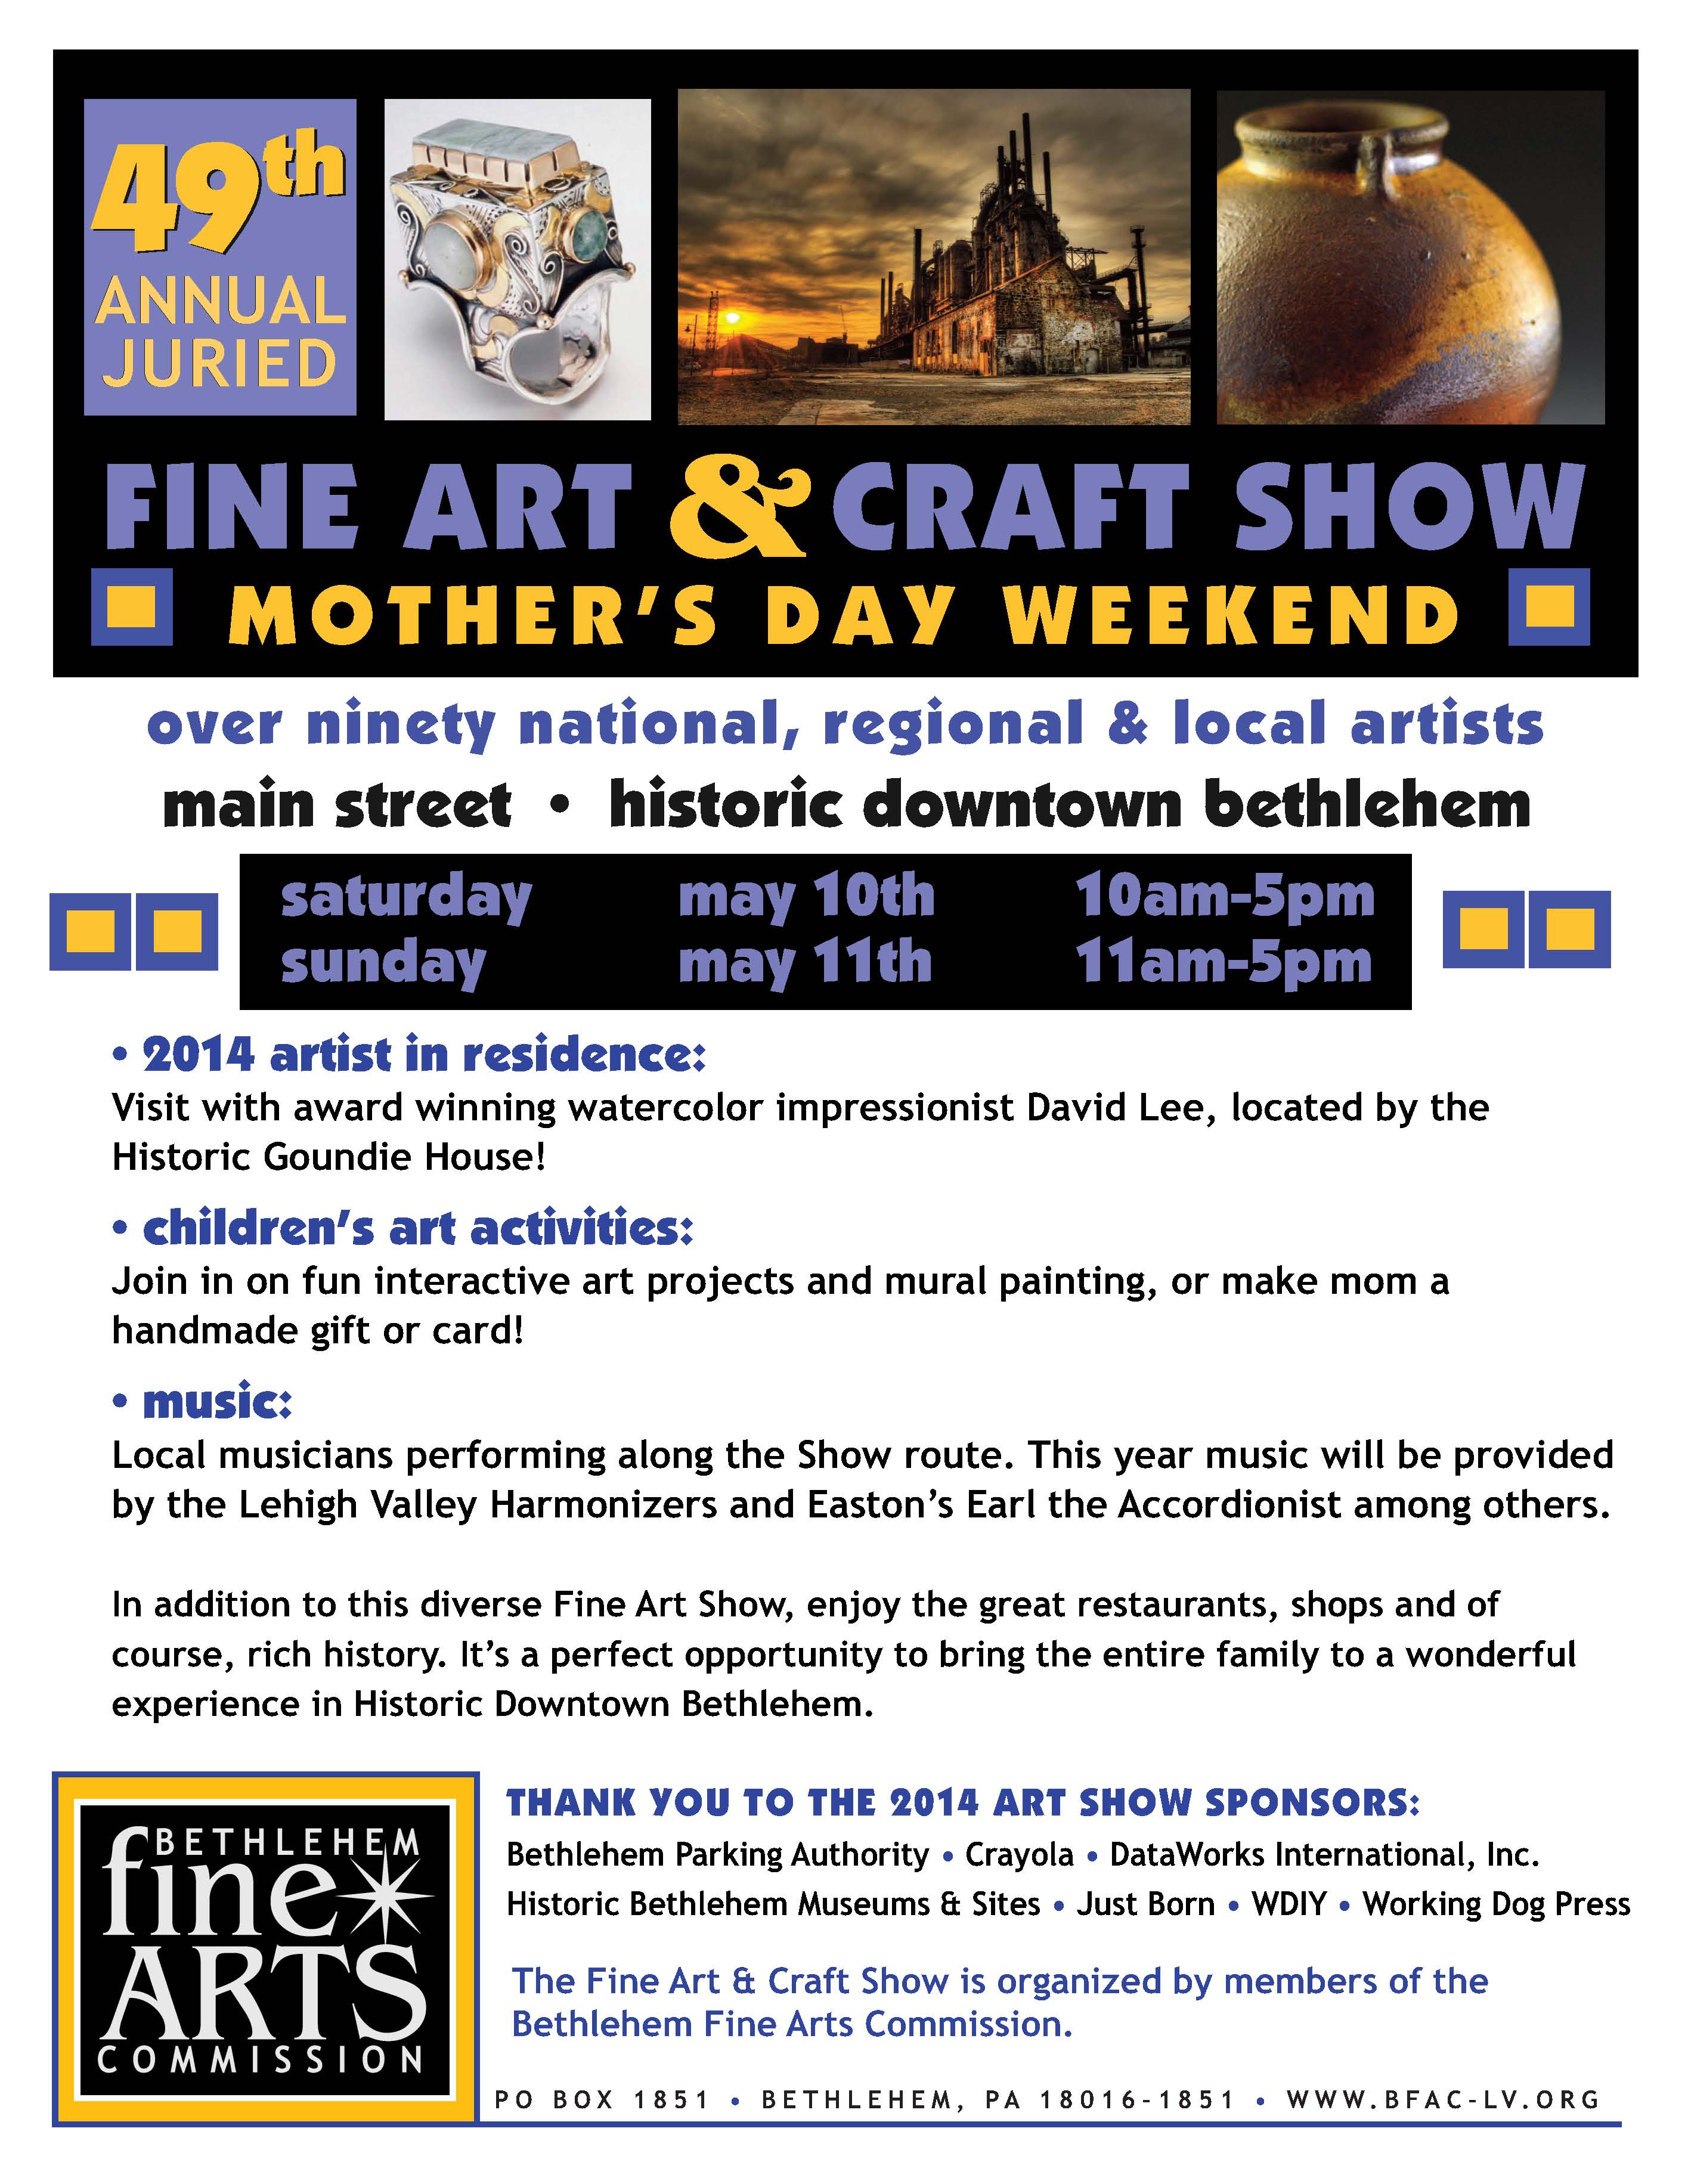 49th Annual Fine Art and Craft Show